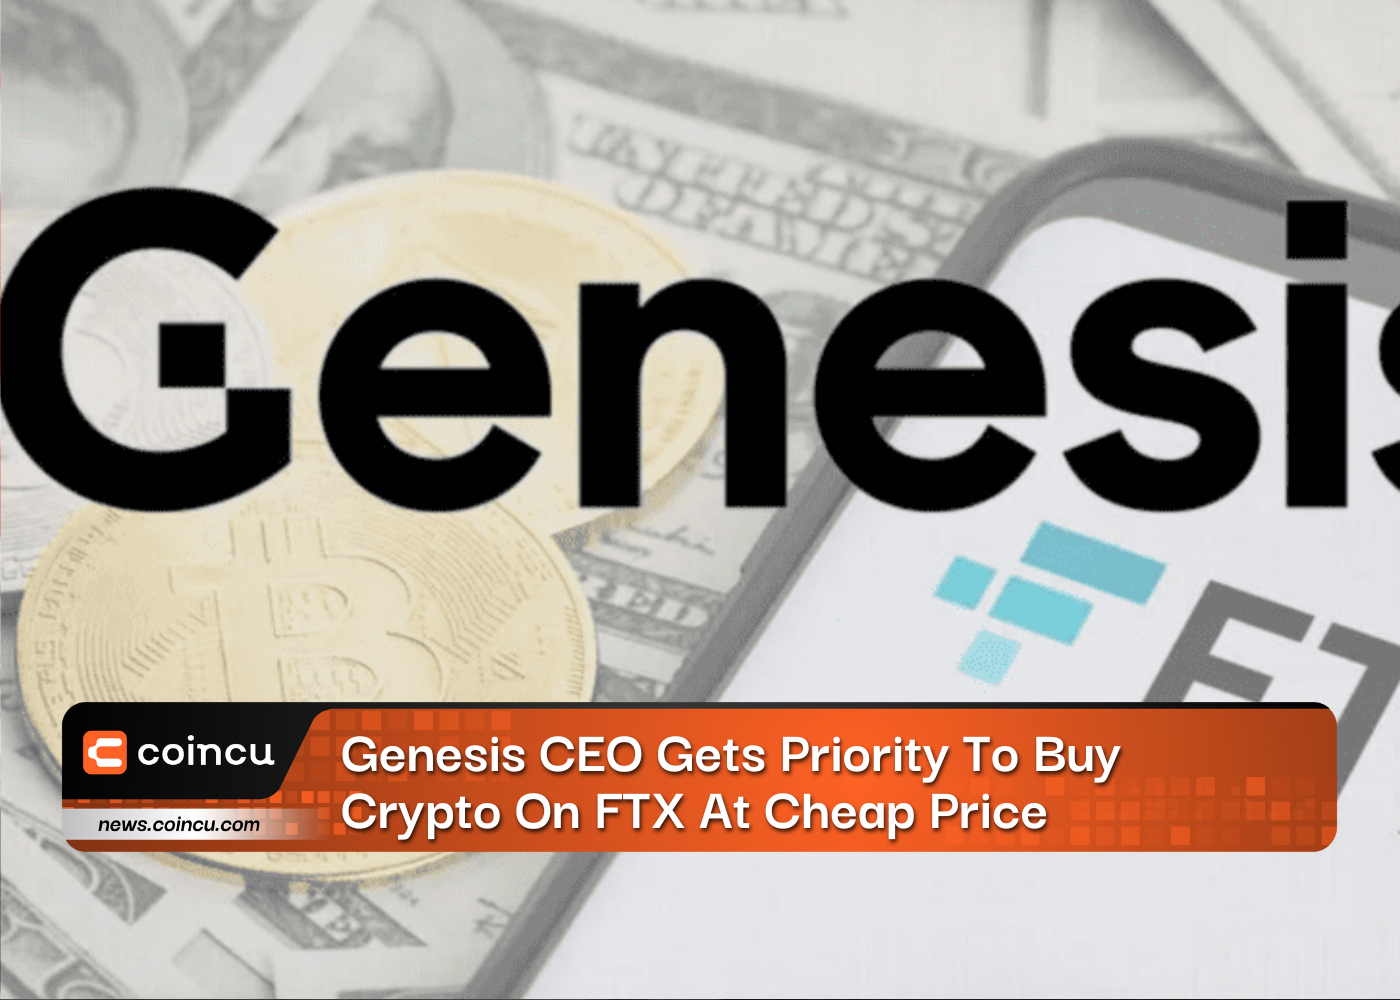 Genesis CEO Gets Priority To Buy Crypto On FTX At Cheap Price